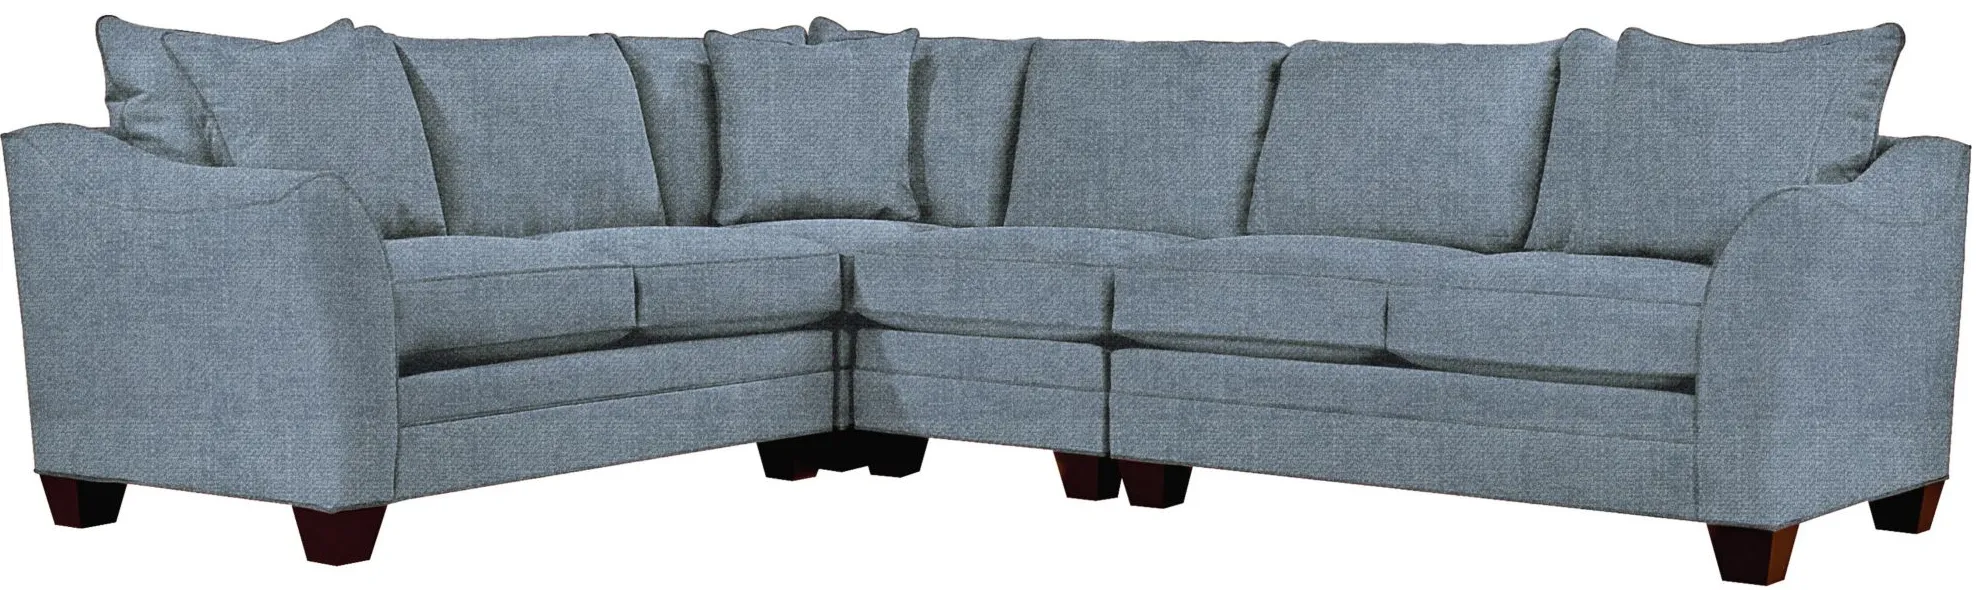 Foresthill 4-pc. Loveseat Sectional Sofa in Elliot French Blue by H.M. Richards